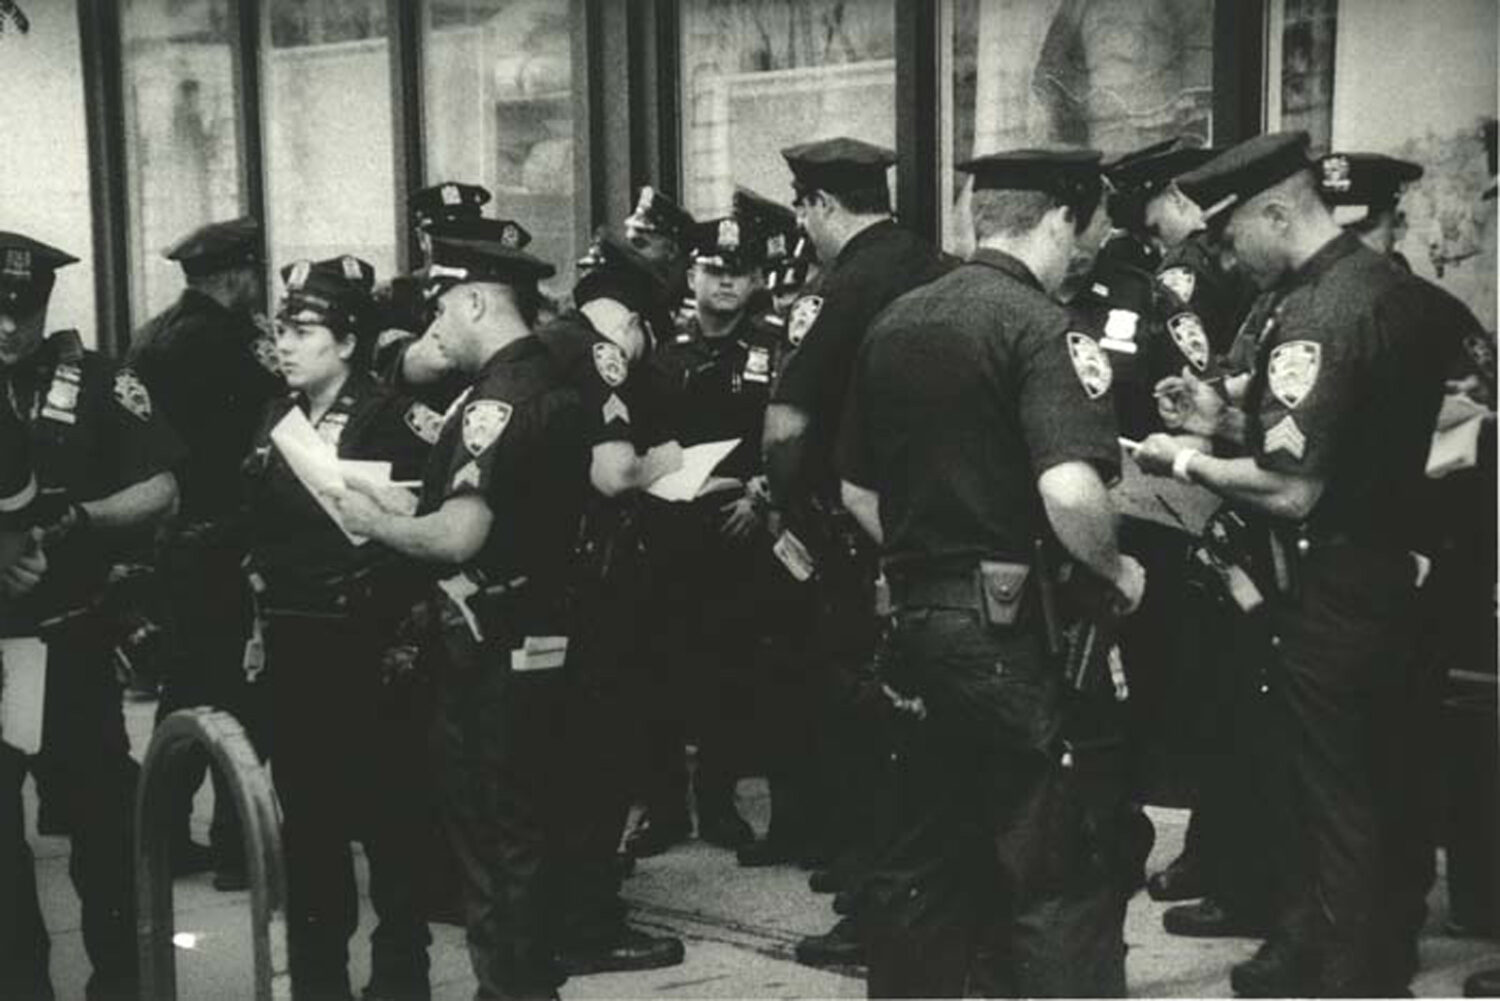 thumbnail of Silver gelatin print by Jinyi Zhao untitled (NYPD).